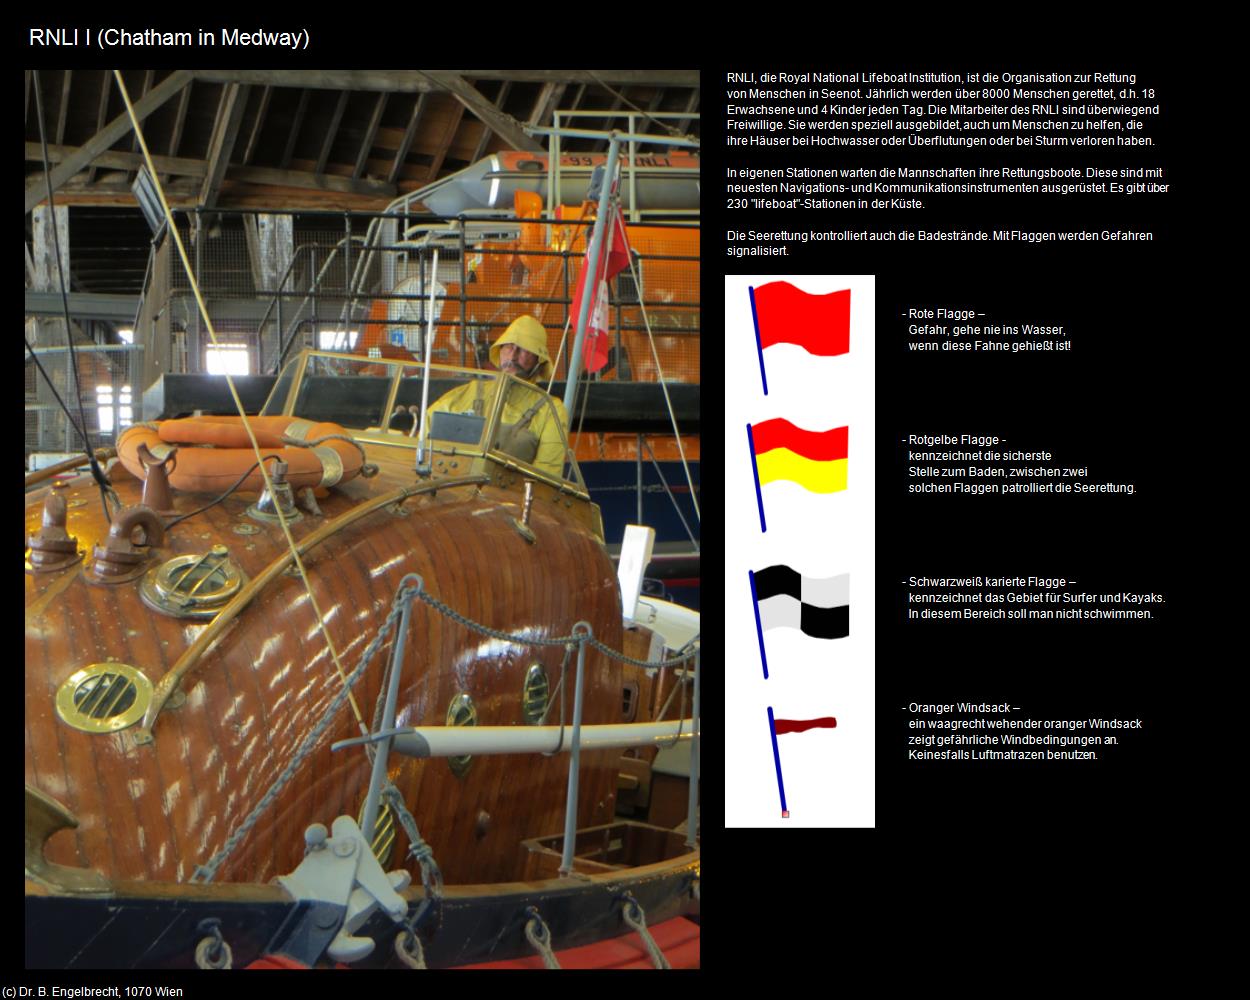 RNLI I (Chatham in Medway, England) in Kulturatlas-ENGLAND und WALES